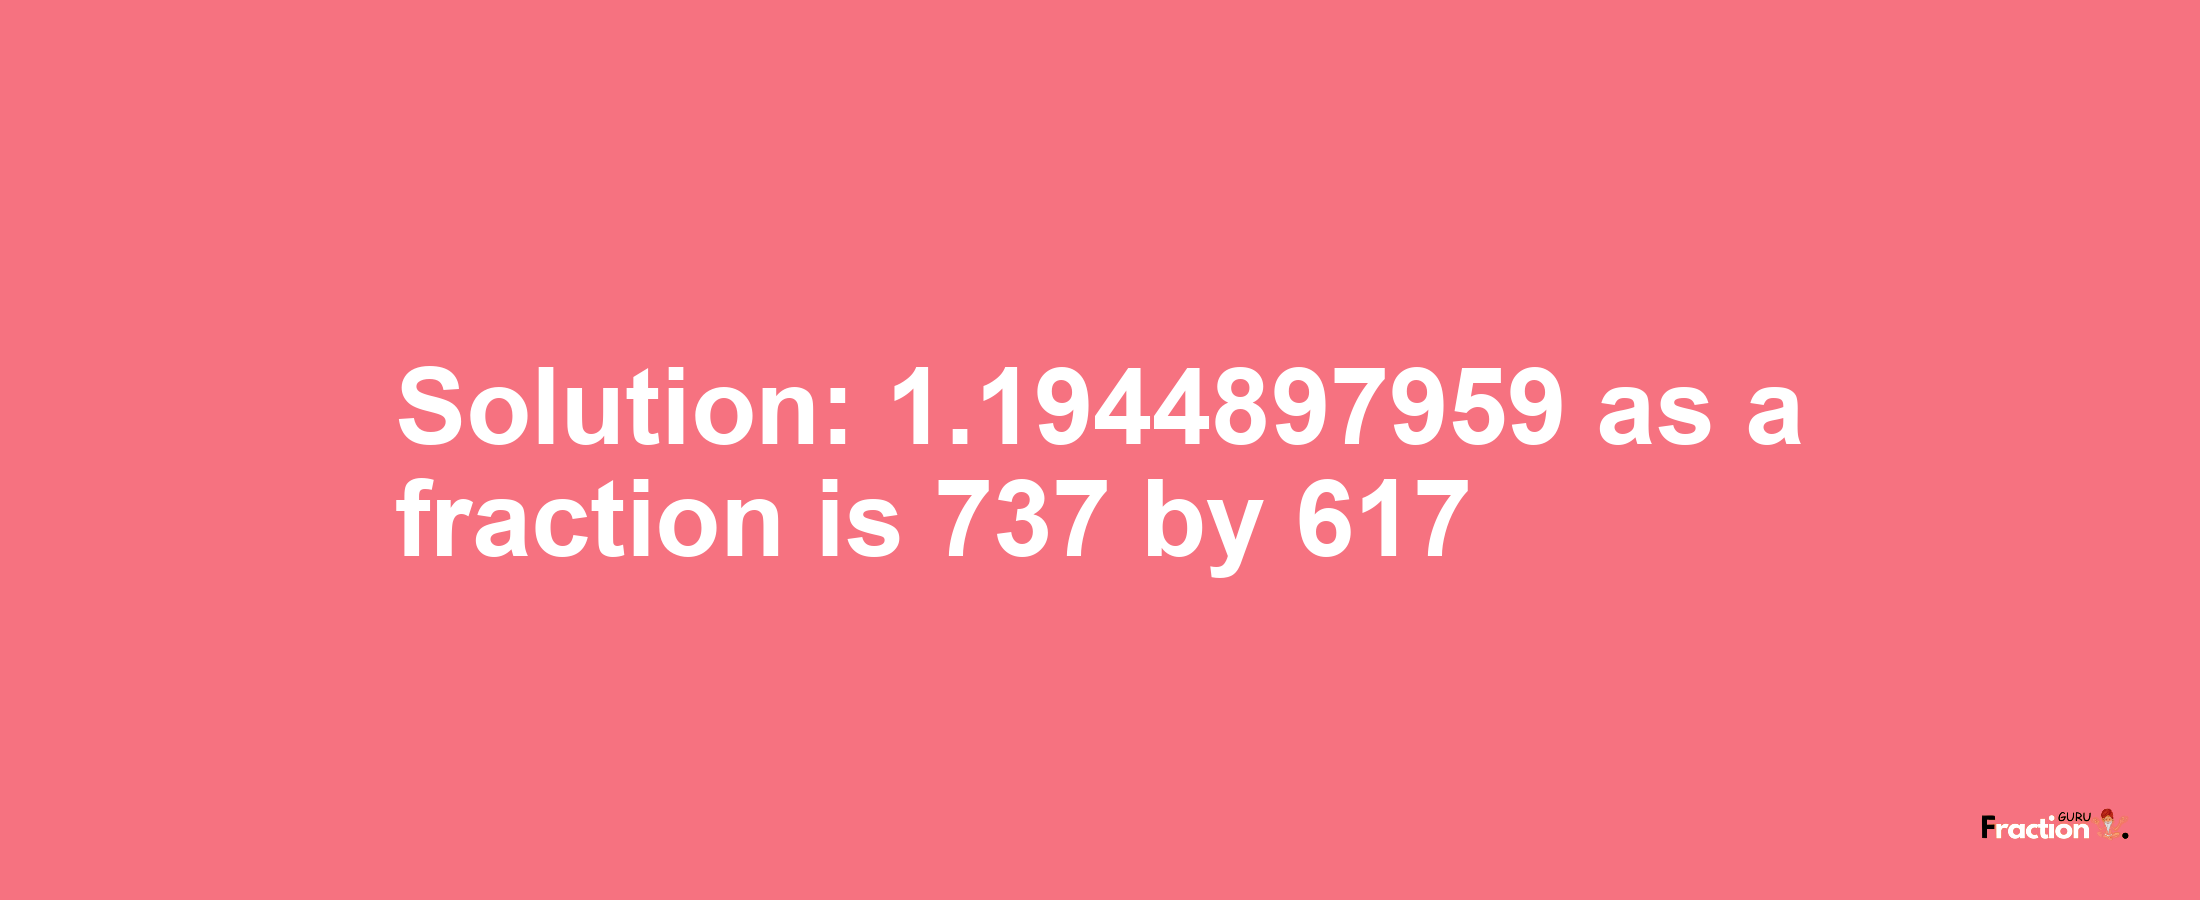 Solution:1.1944897959 as a fraction is 737/617